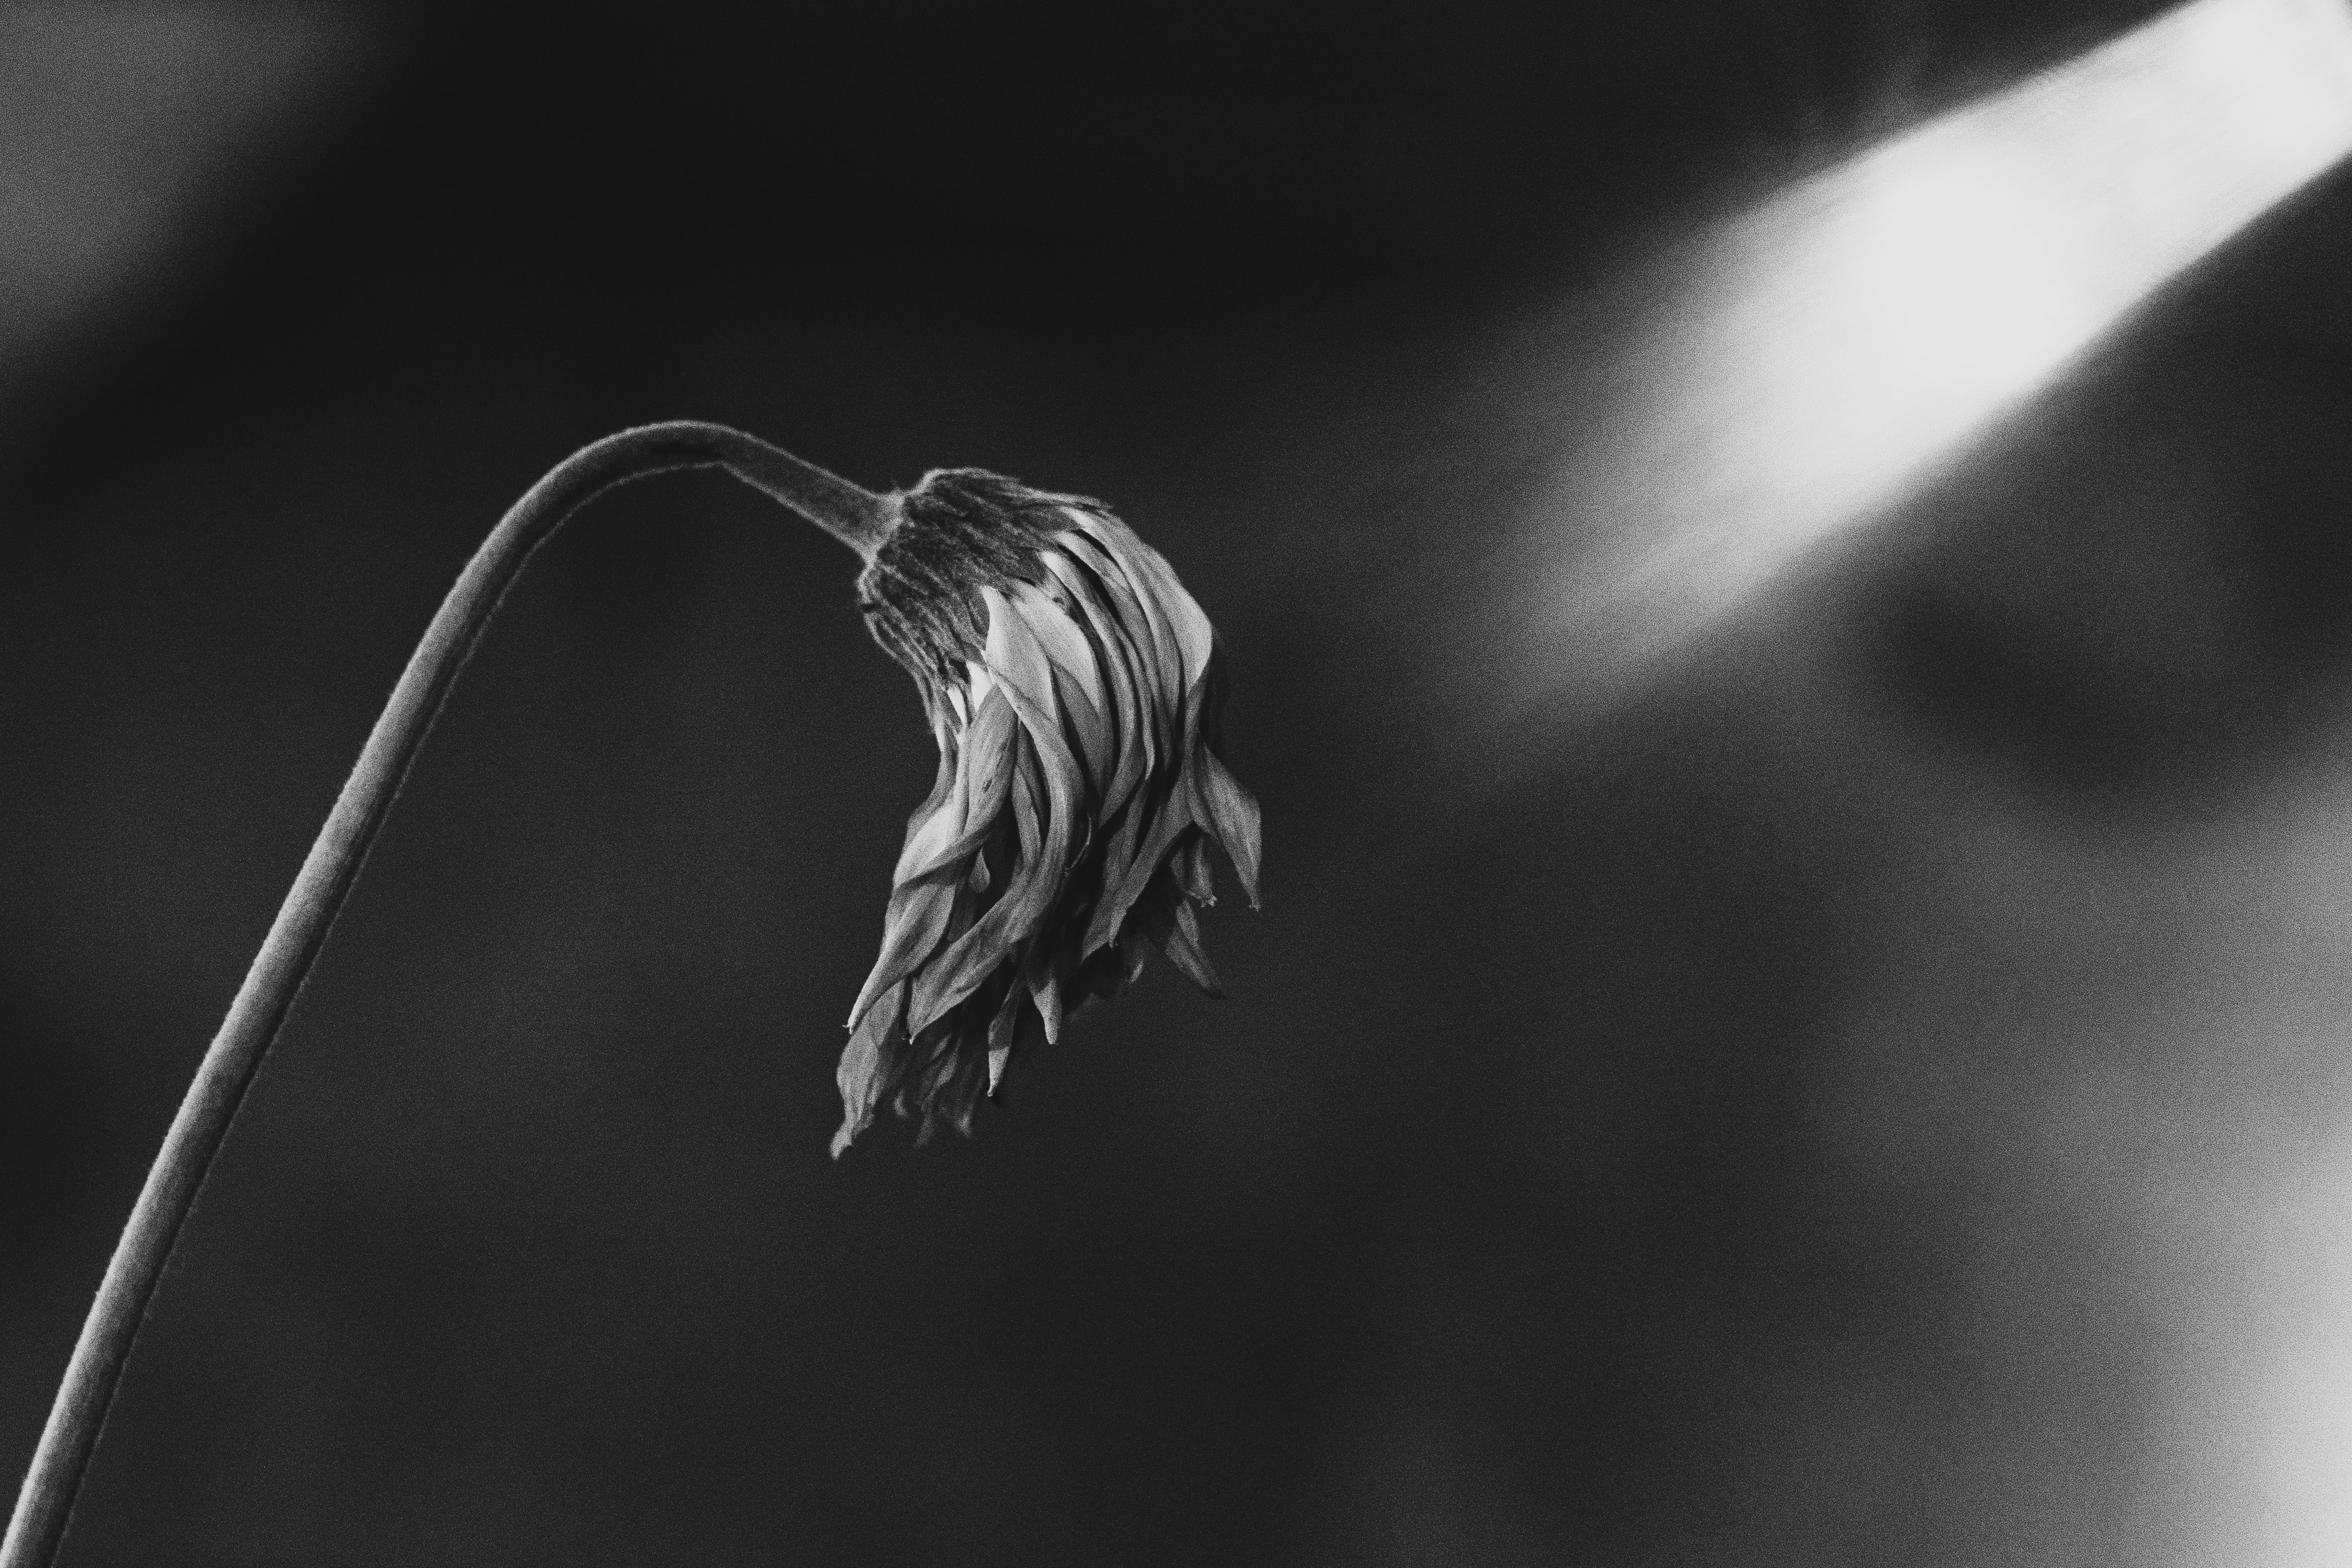 An artistic black and white photo of a wilting flower lit by a beam of sunlight.